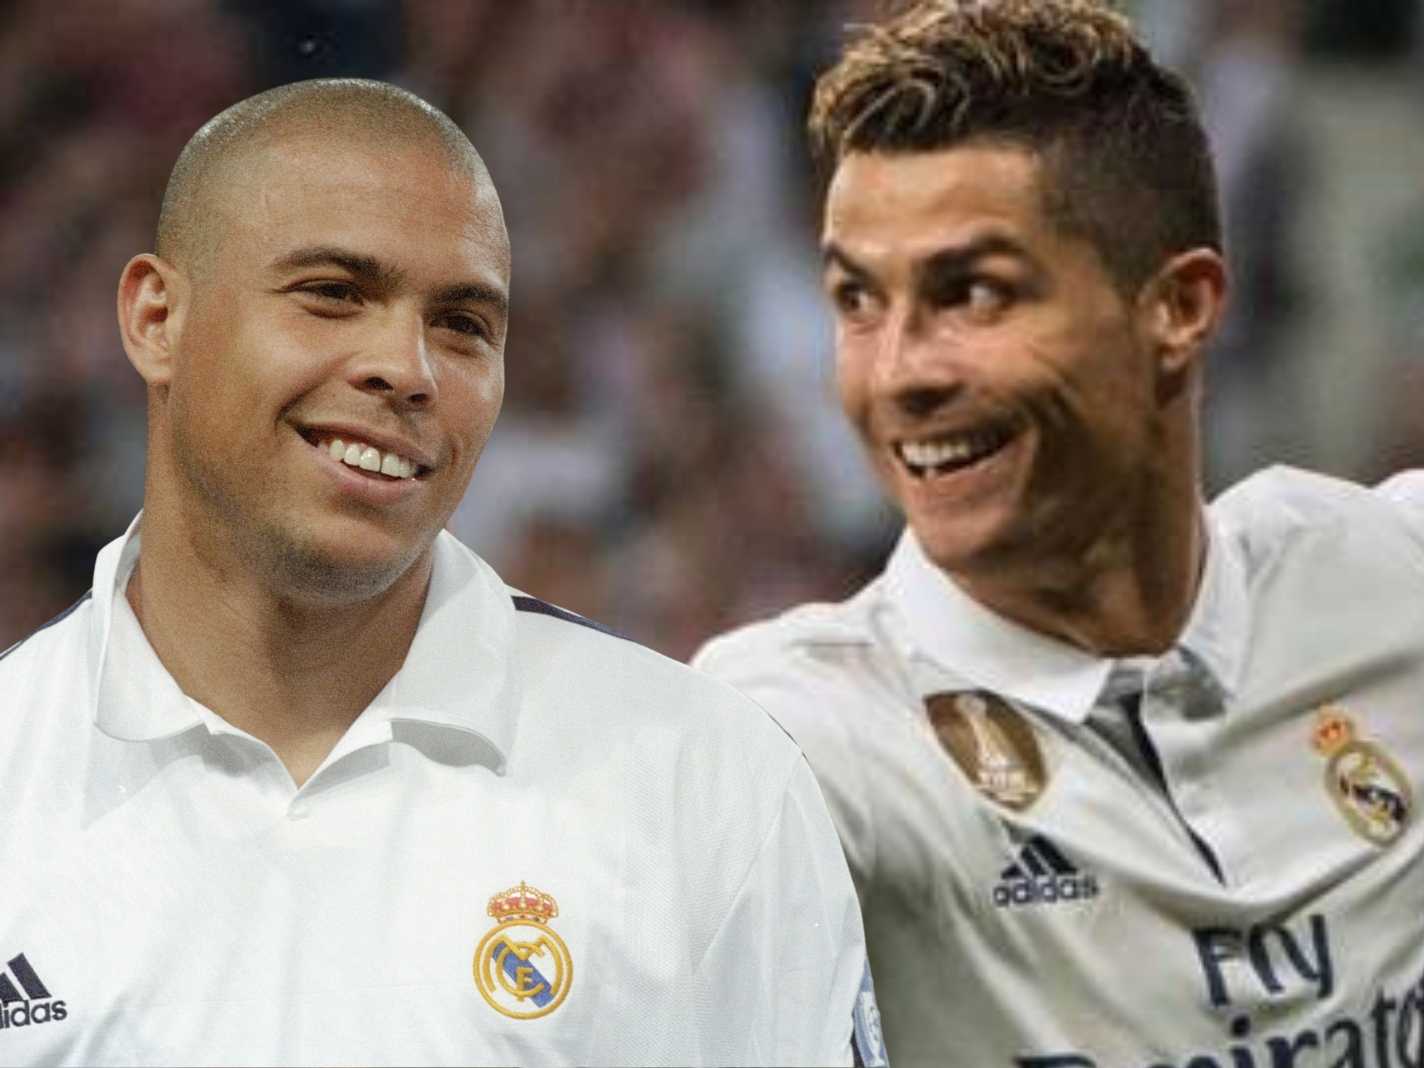 Thierry Henry ends debate on who is ‘real Ronaldo’ between R9 and CR7